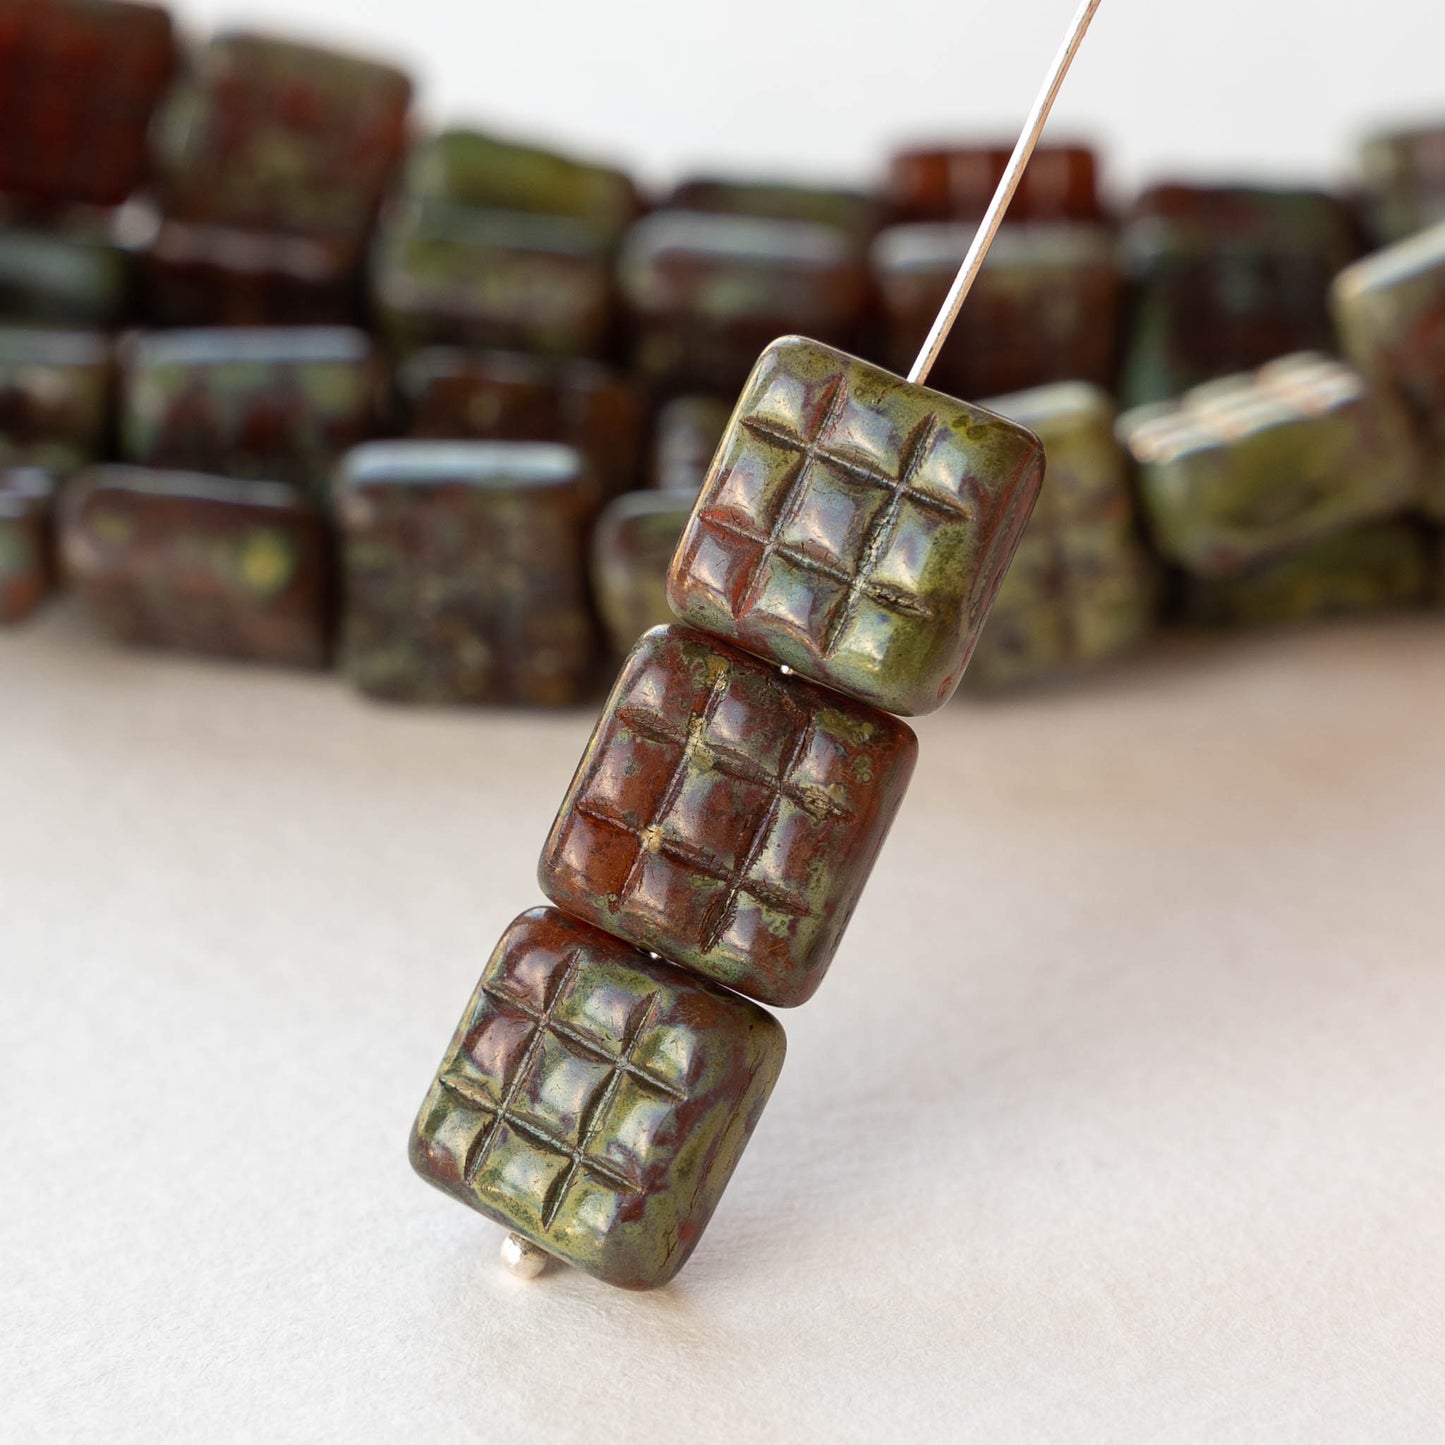 13mm Glass Tile Bead - Picasso Redish and Greenish - 10 beads